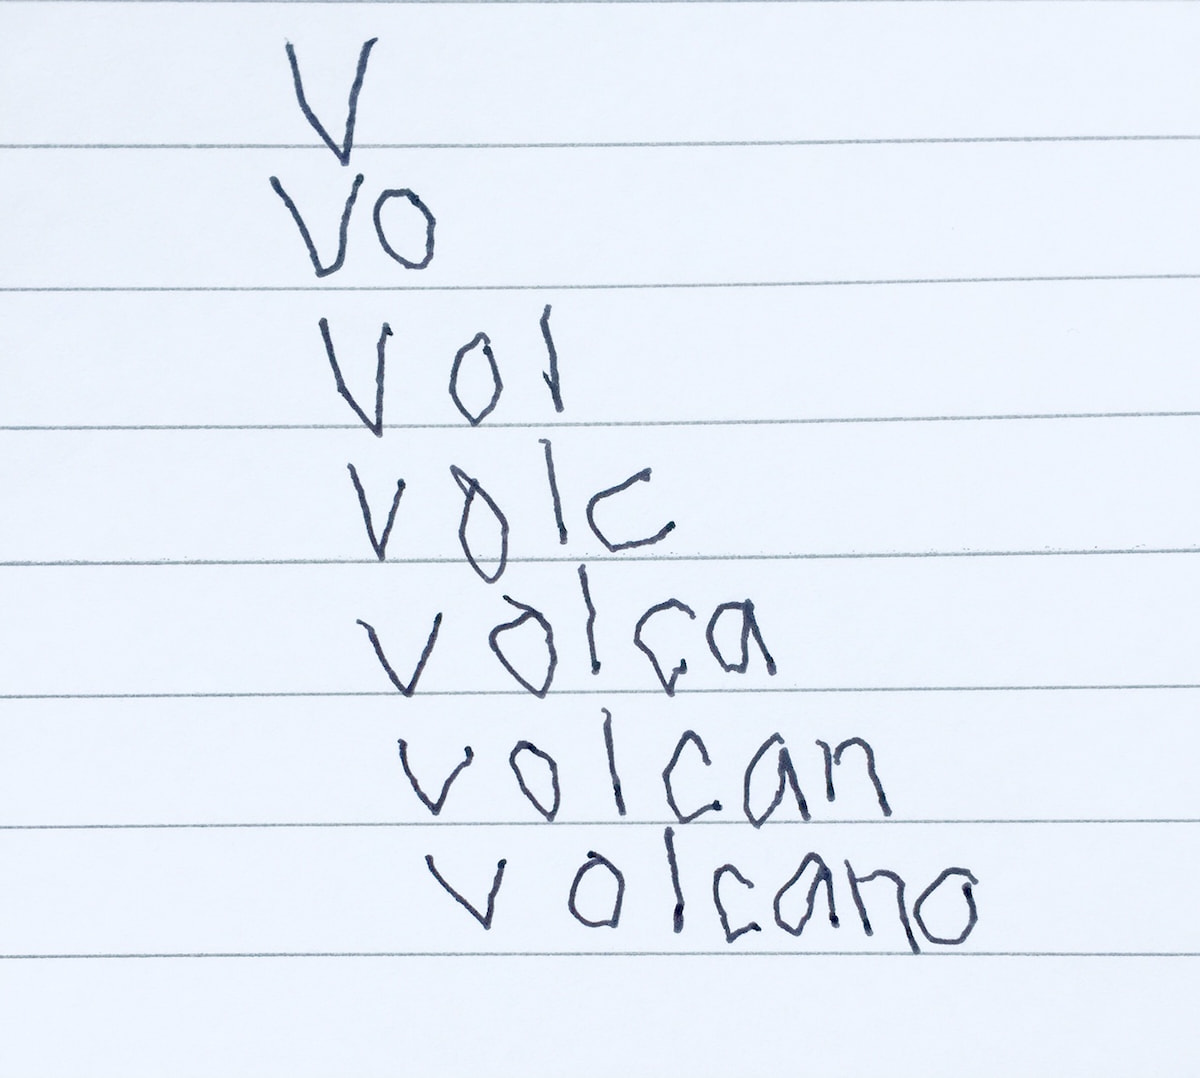 Image of the word 'volcano' written on a piece of paper in a child's handwriting.